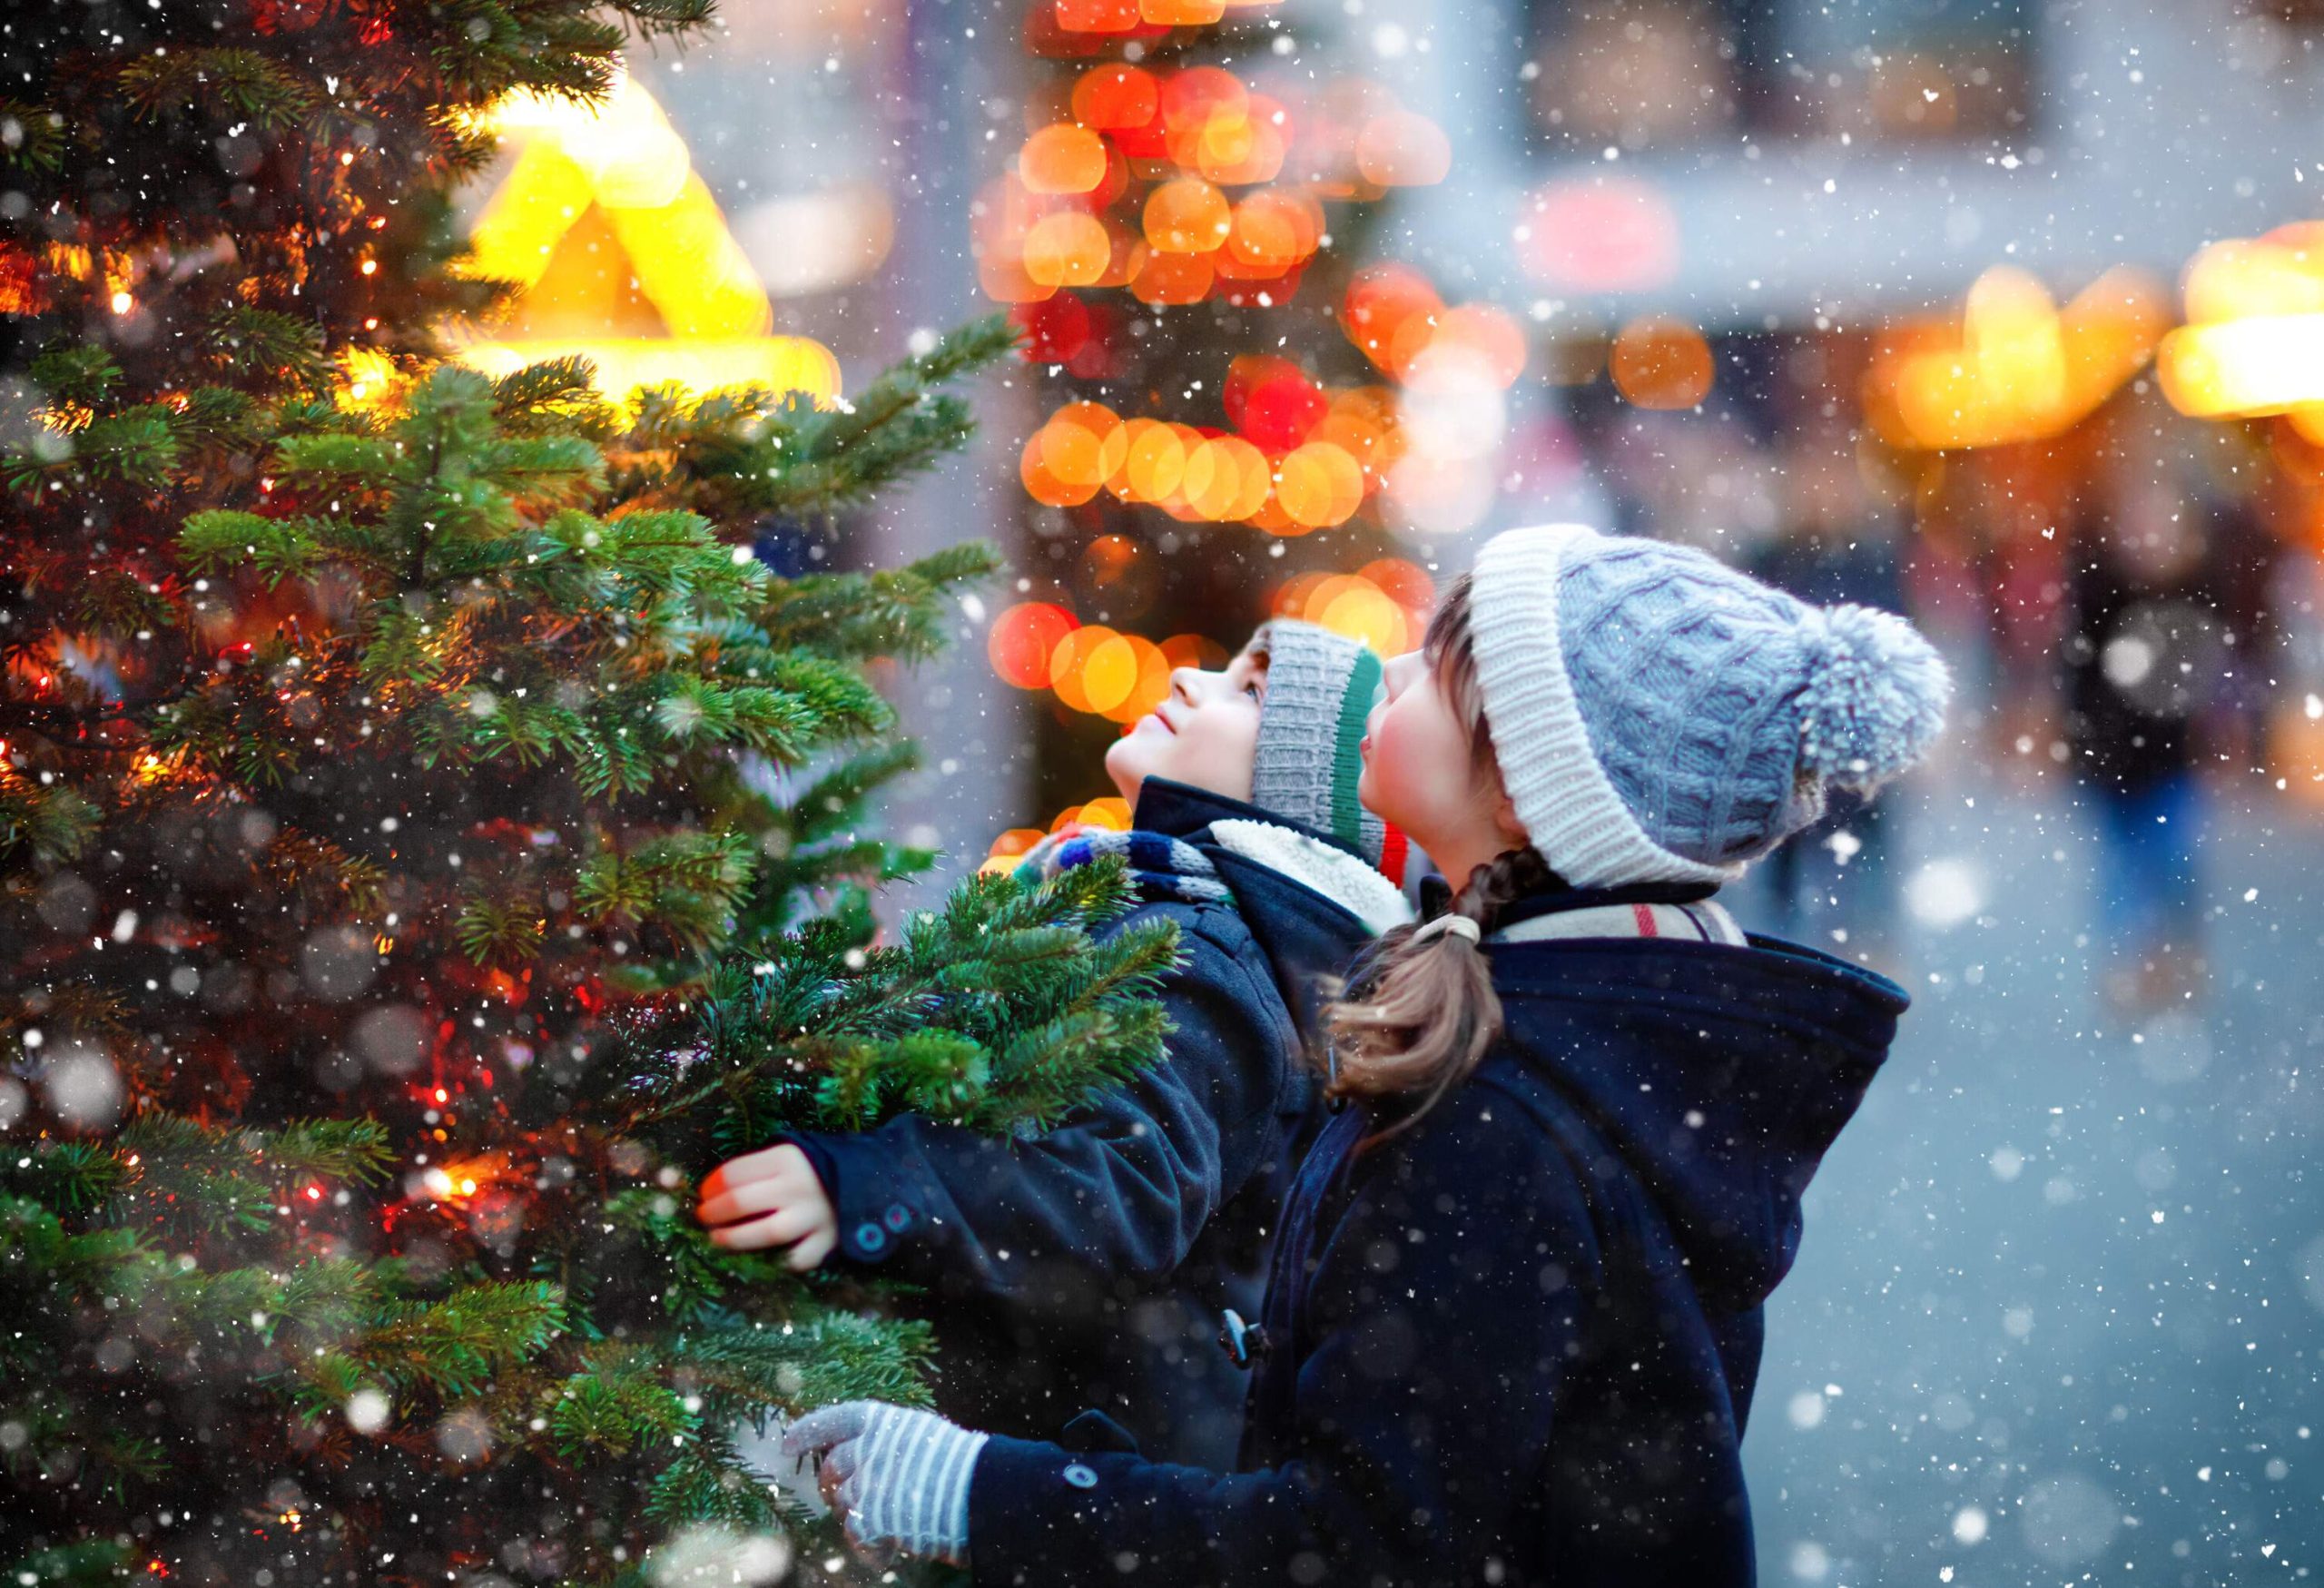 Two kids in winter jacket and knitted cap gaze up to a Christmas tree during a snowfall.